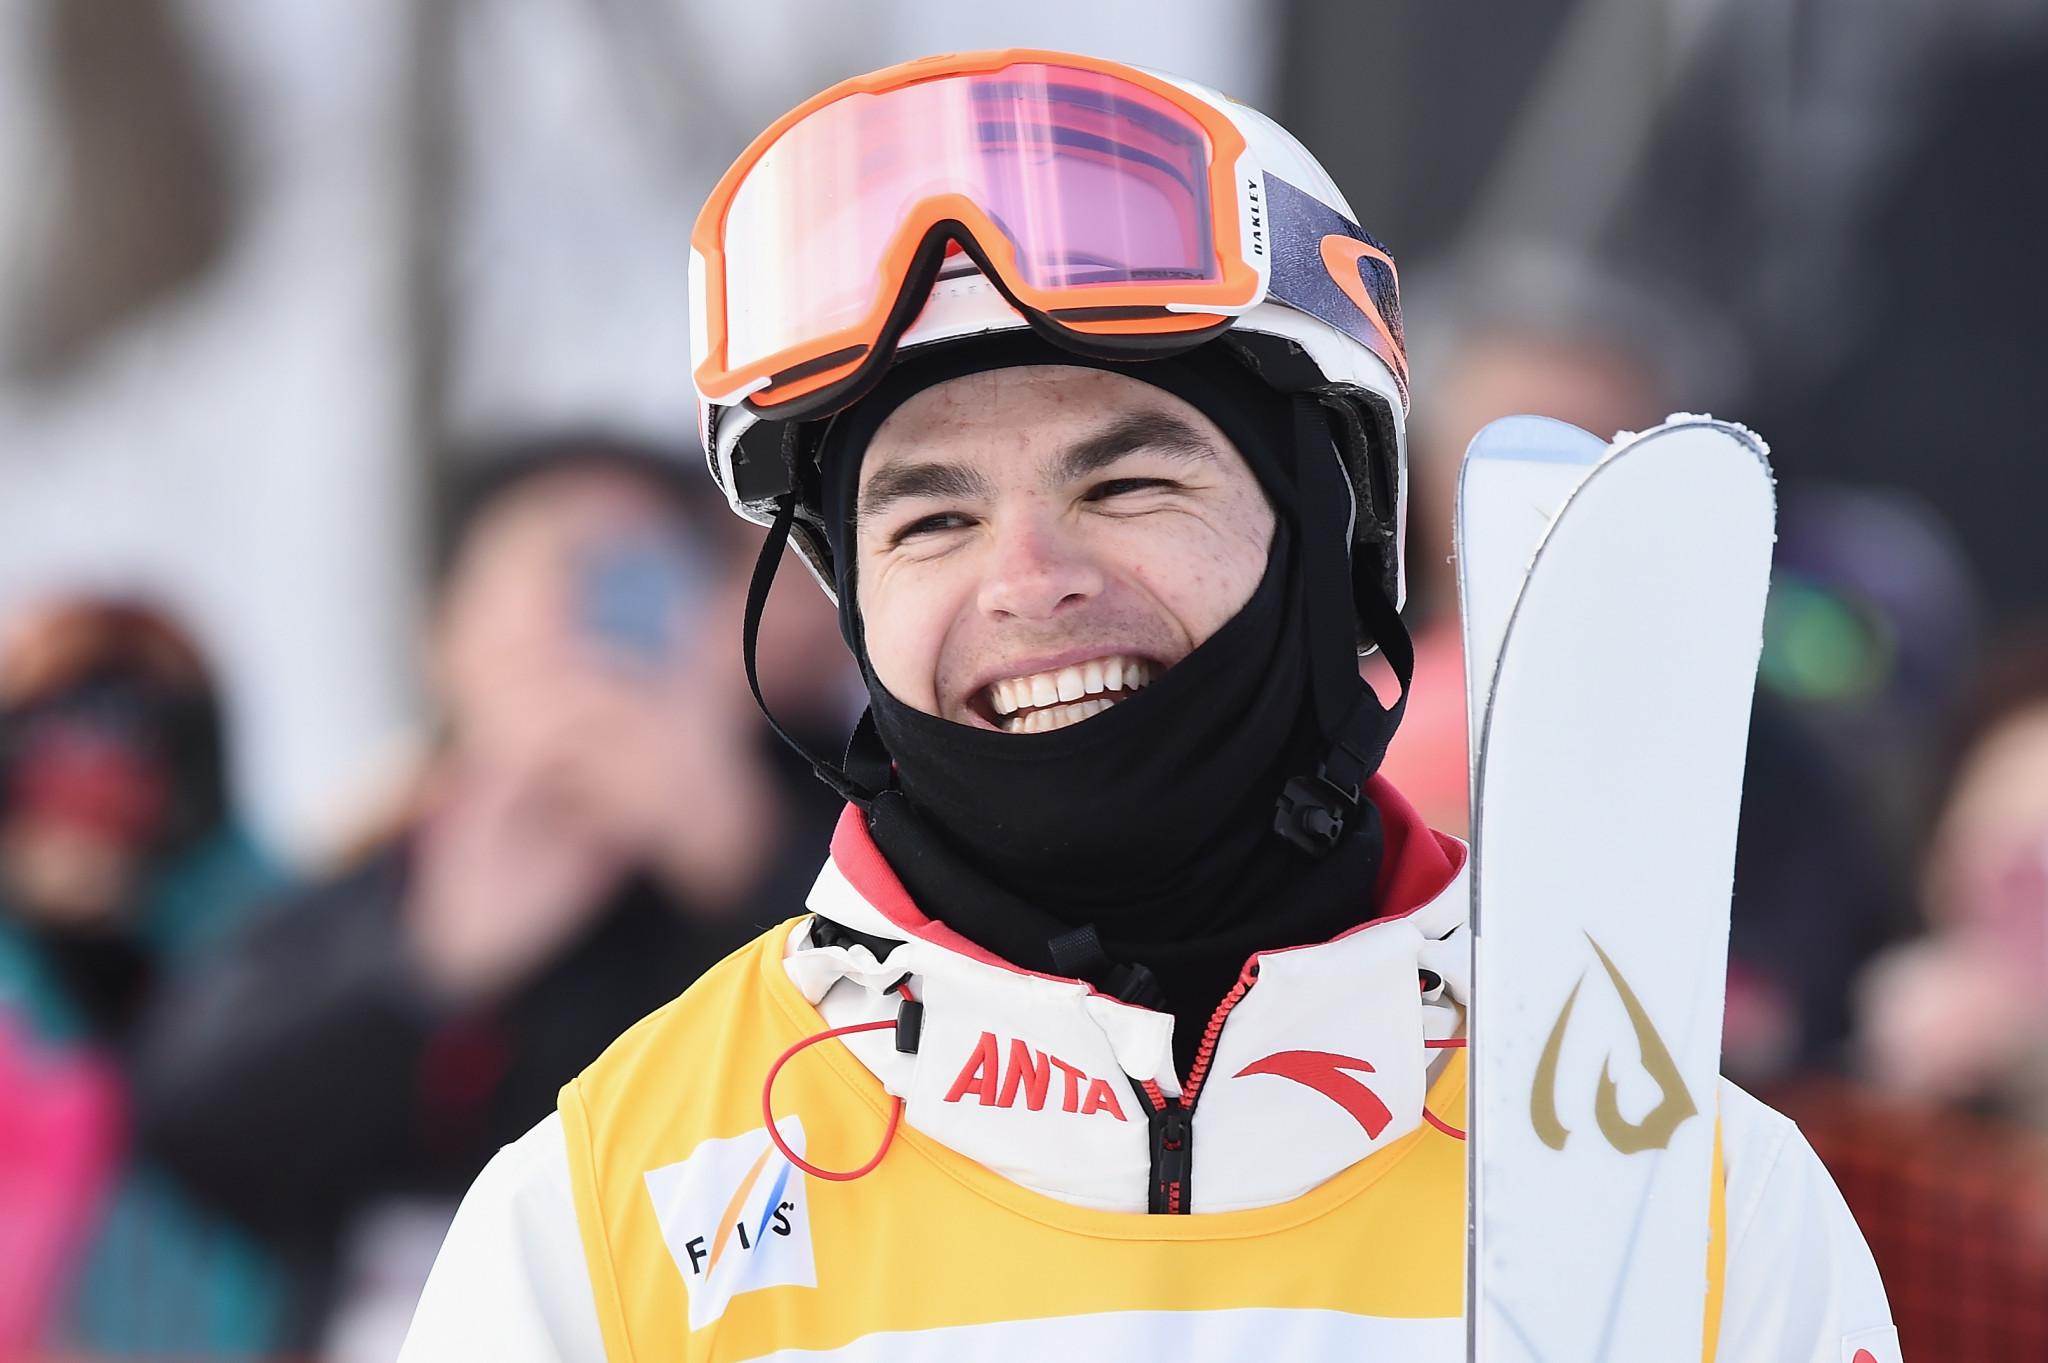 Mikael Kingsbury won the men's dual moguls event at the FIS Freestyle Ski World Cup ©Getty Images